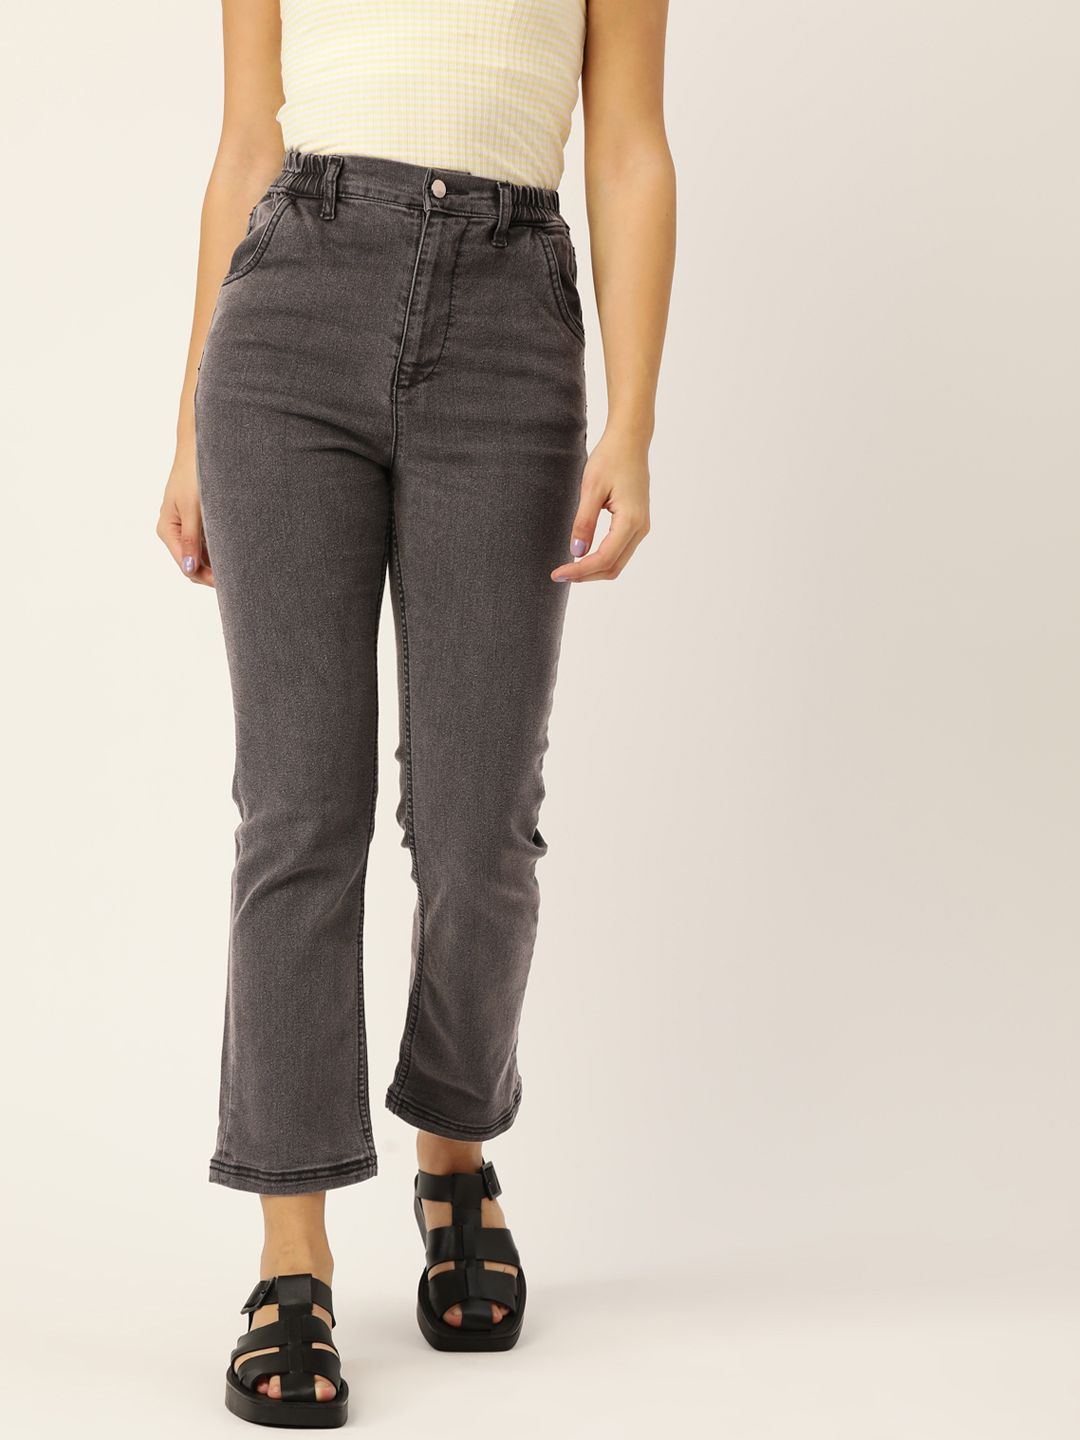 DressBerry Women Charcoal Grey Regular Fit Stretchable Jeans Price in India